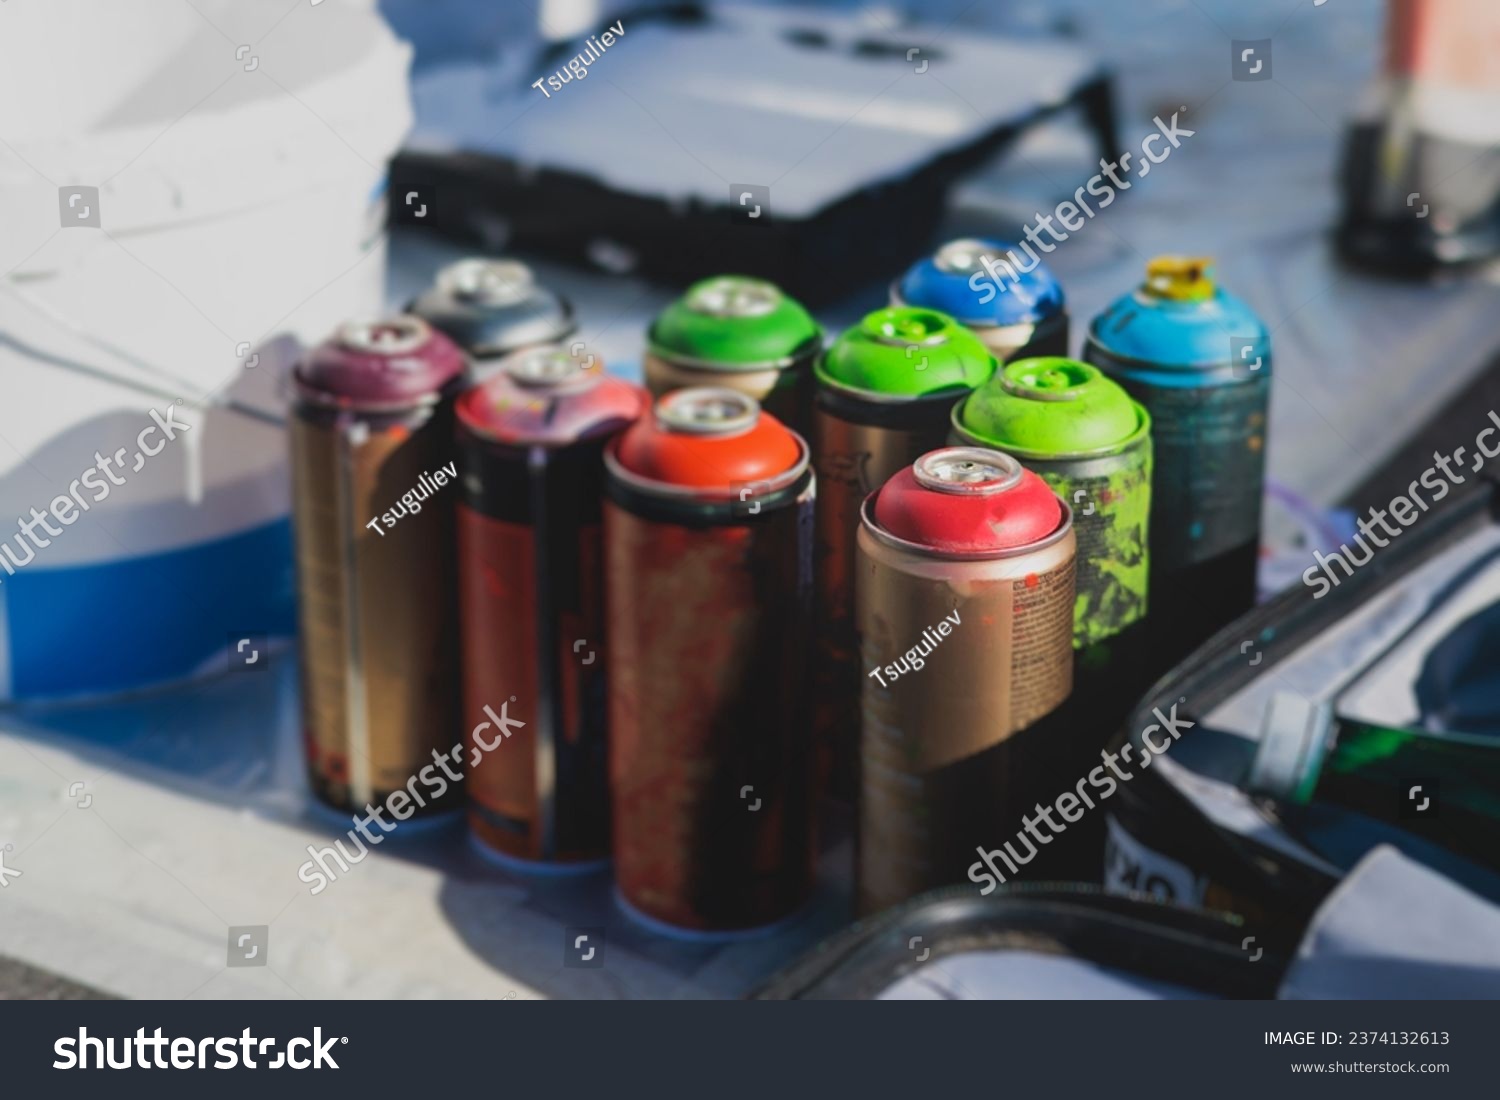 Equipment set for street art, spray cans bottles with aerosol spray paint, creating graffiti and mural on the walls, with paint can, brush, roller, street artist kit for stencil murals and grafiti #2374132613